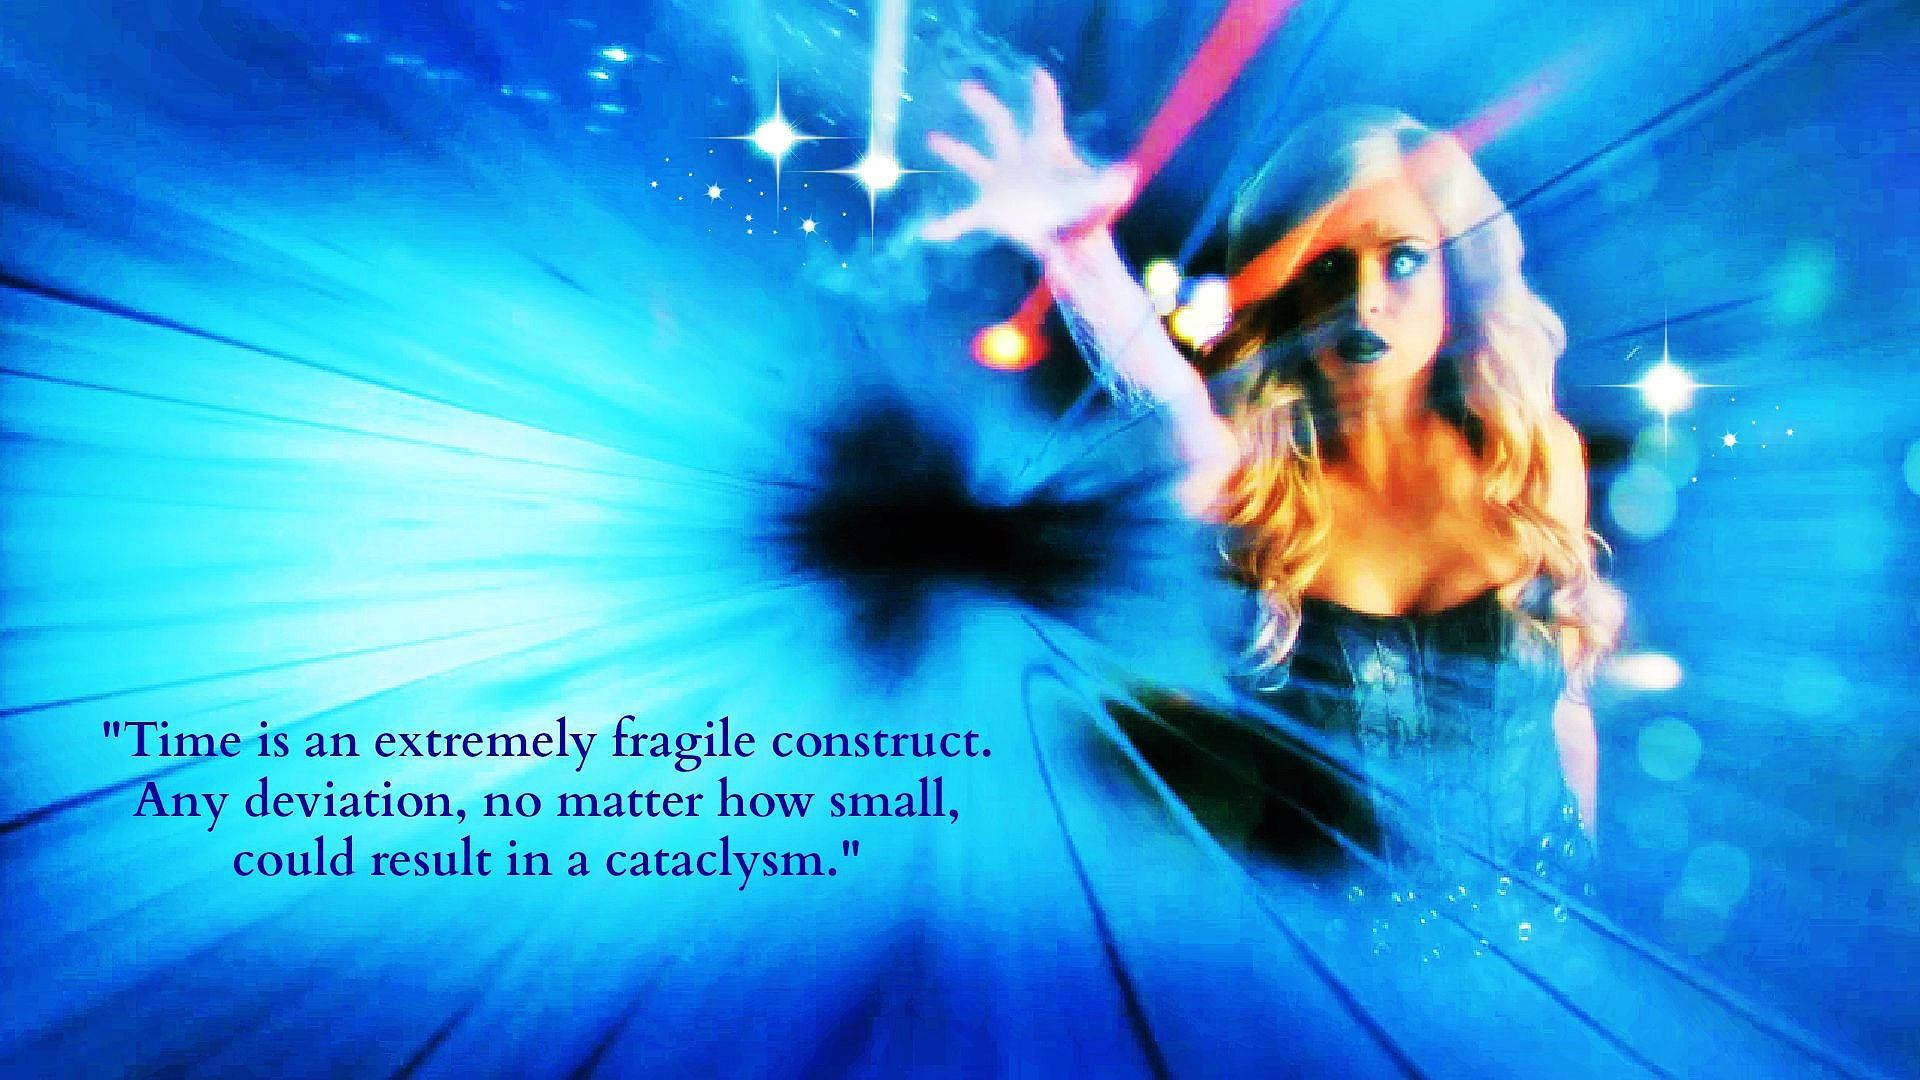 Killer Frost With Cataclysm Quote